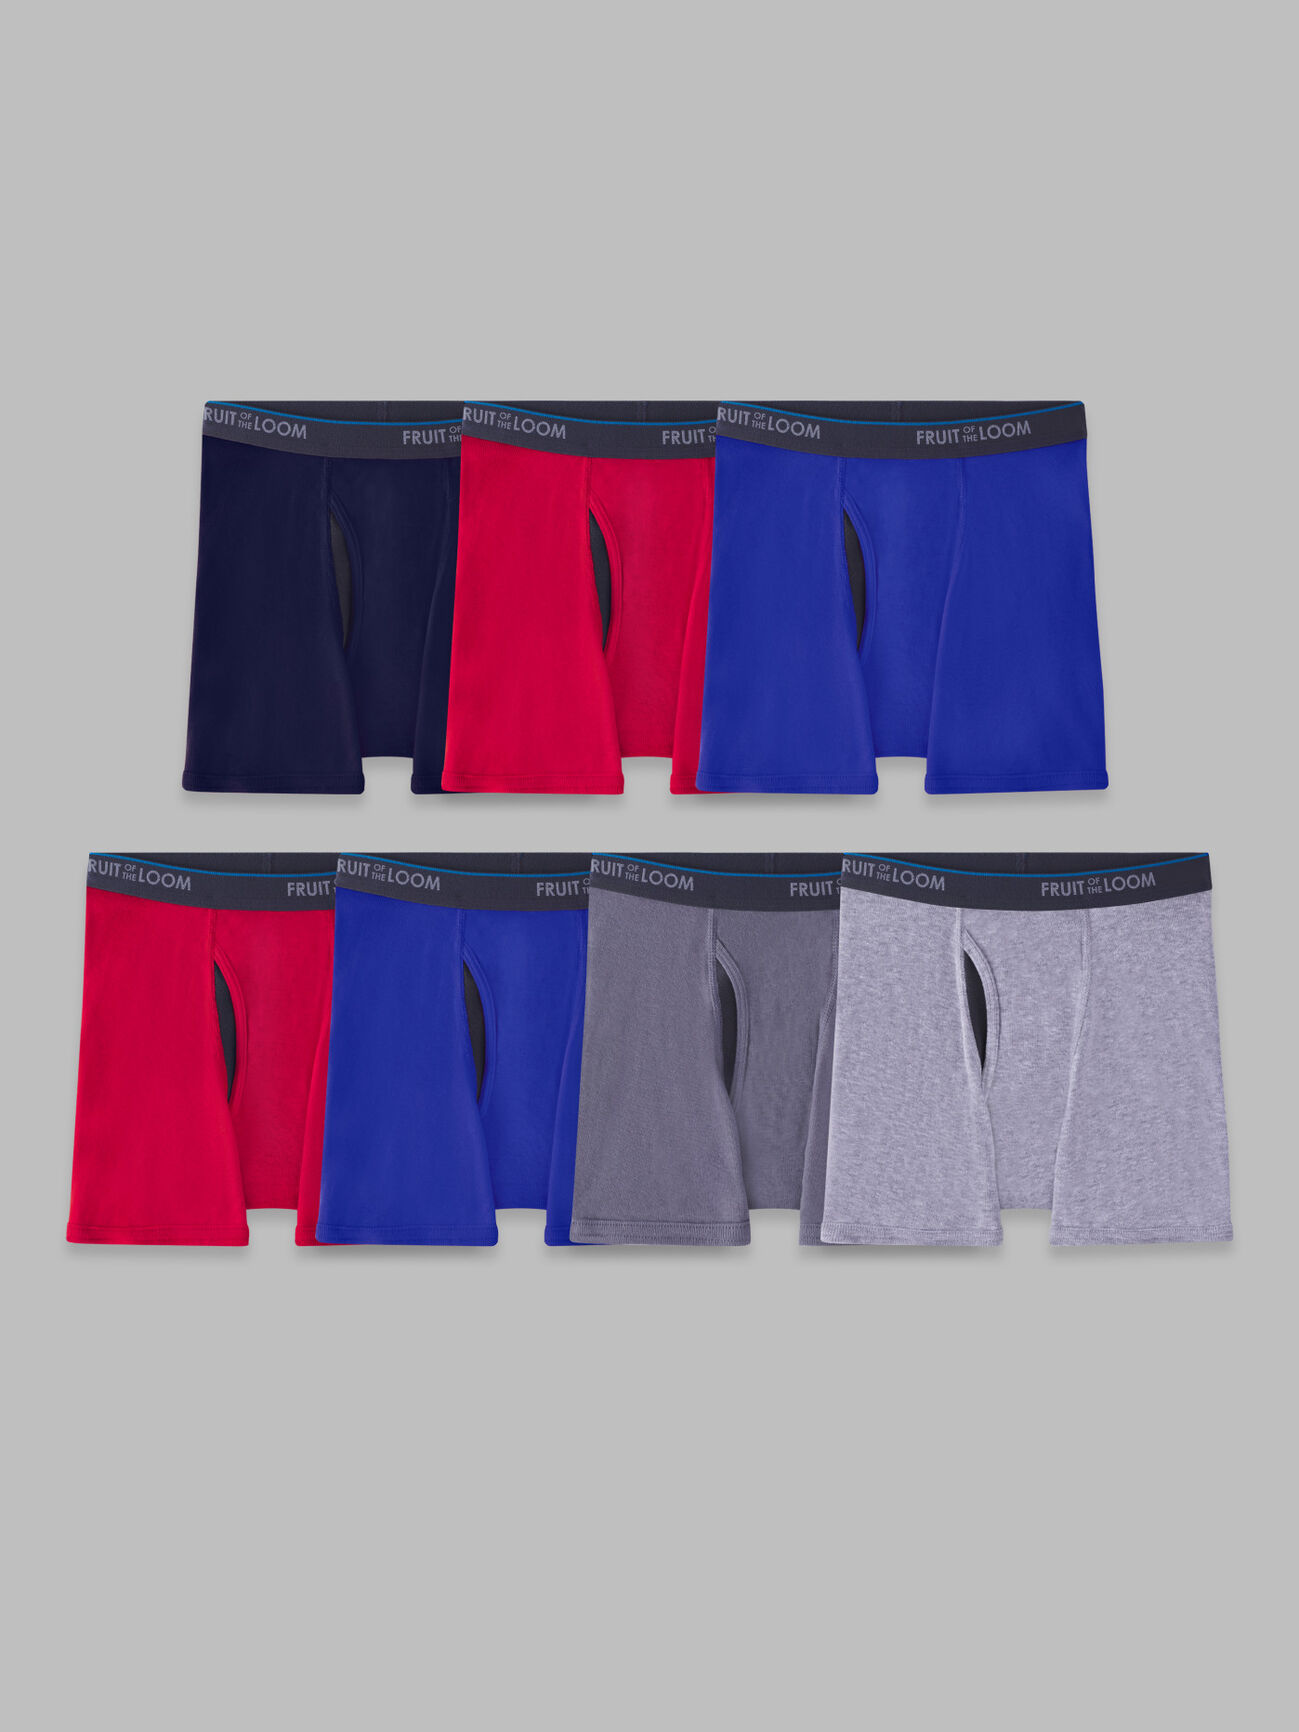 Fruit of the Loom - Tag-free CoolZone Fly boxer briefs, pk. of 3